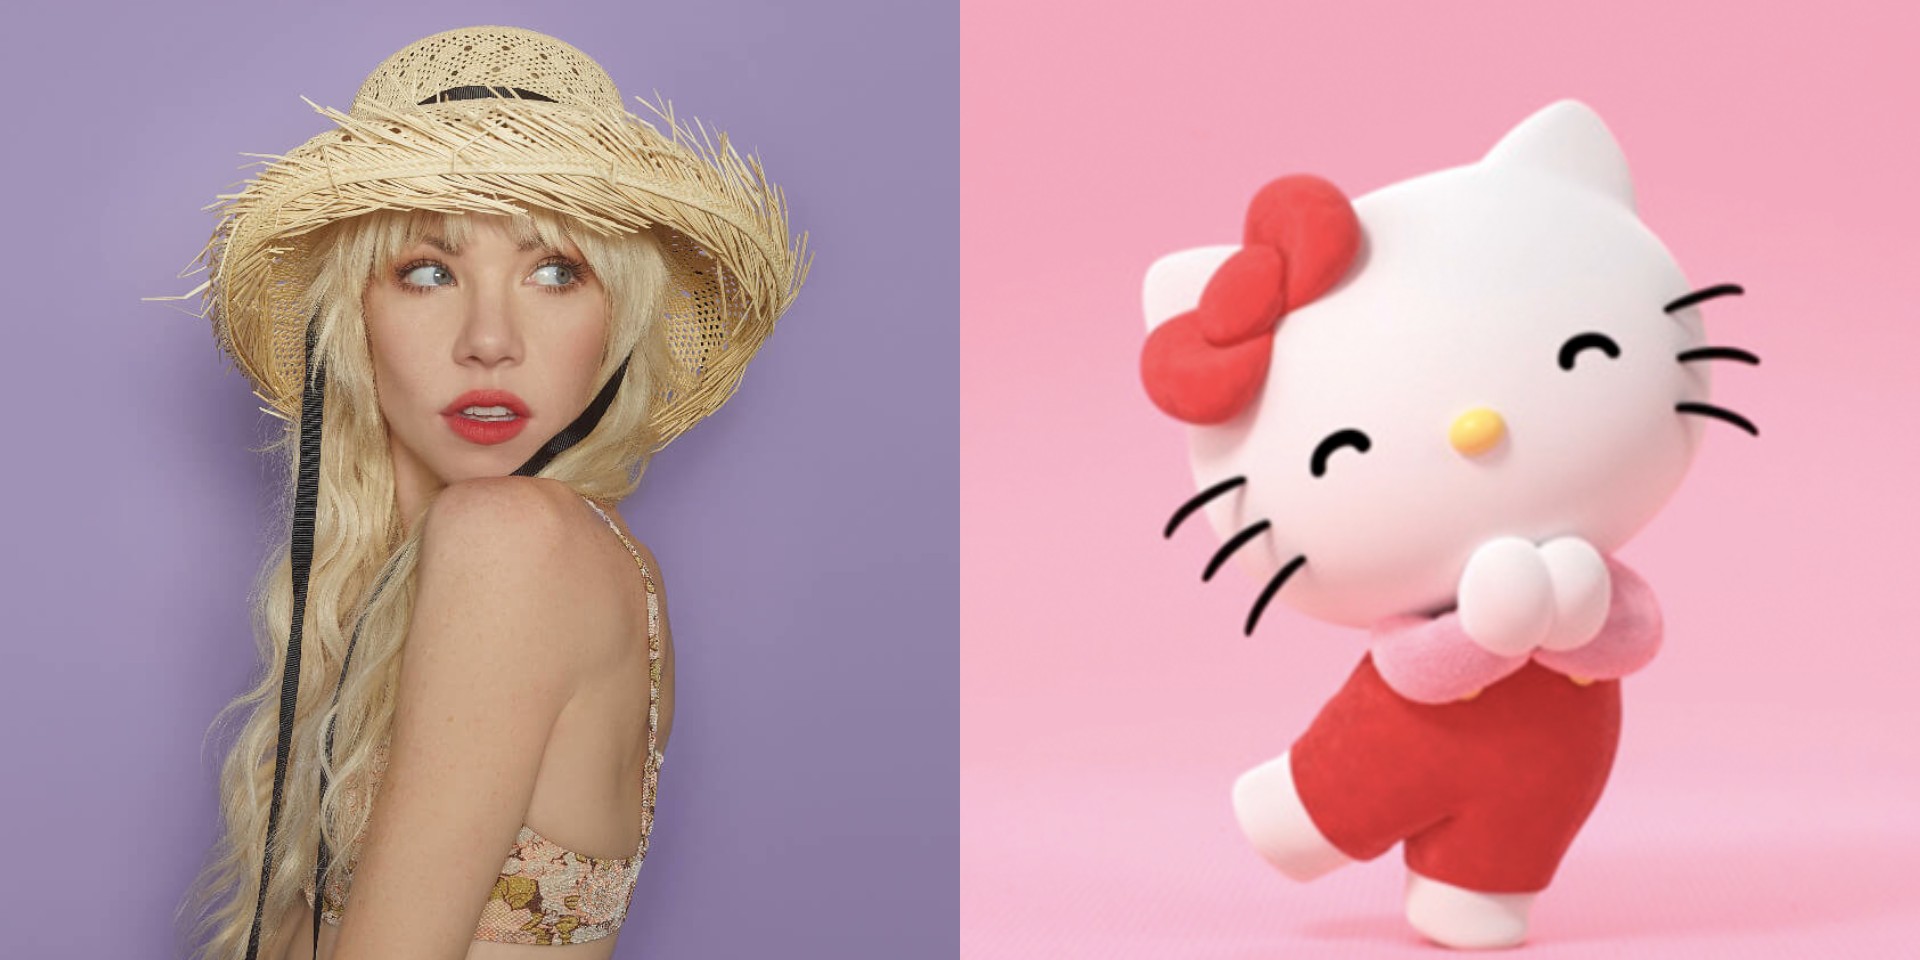 Carly Rae Jepsen performs theme song for new Hello Kitty animated